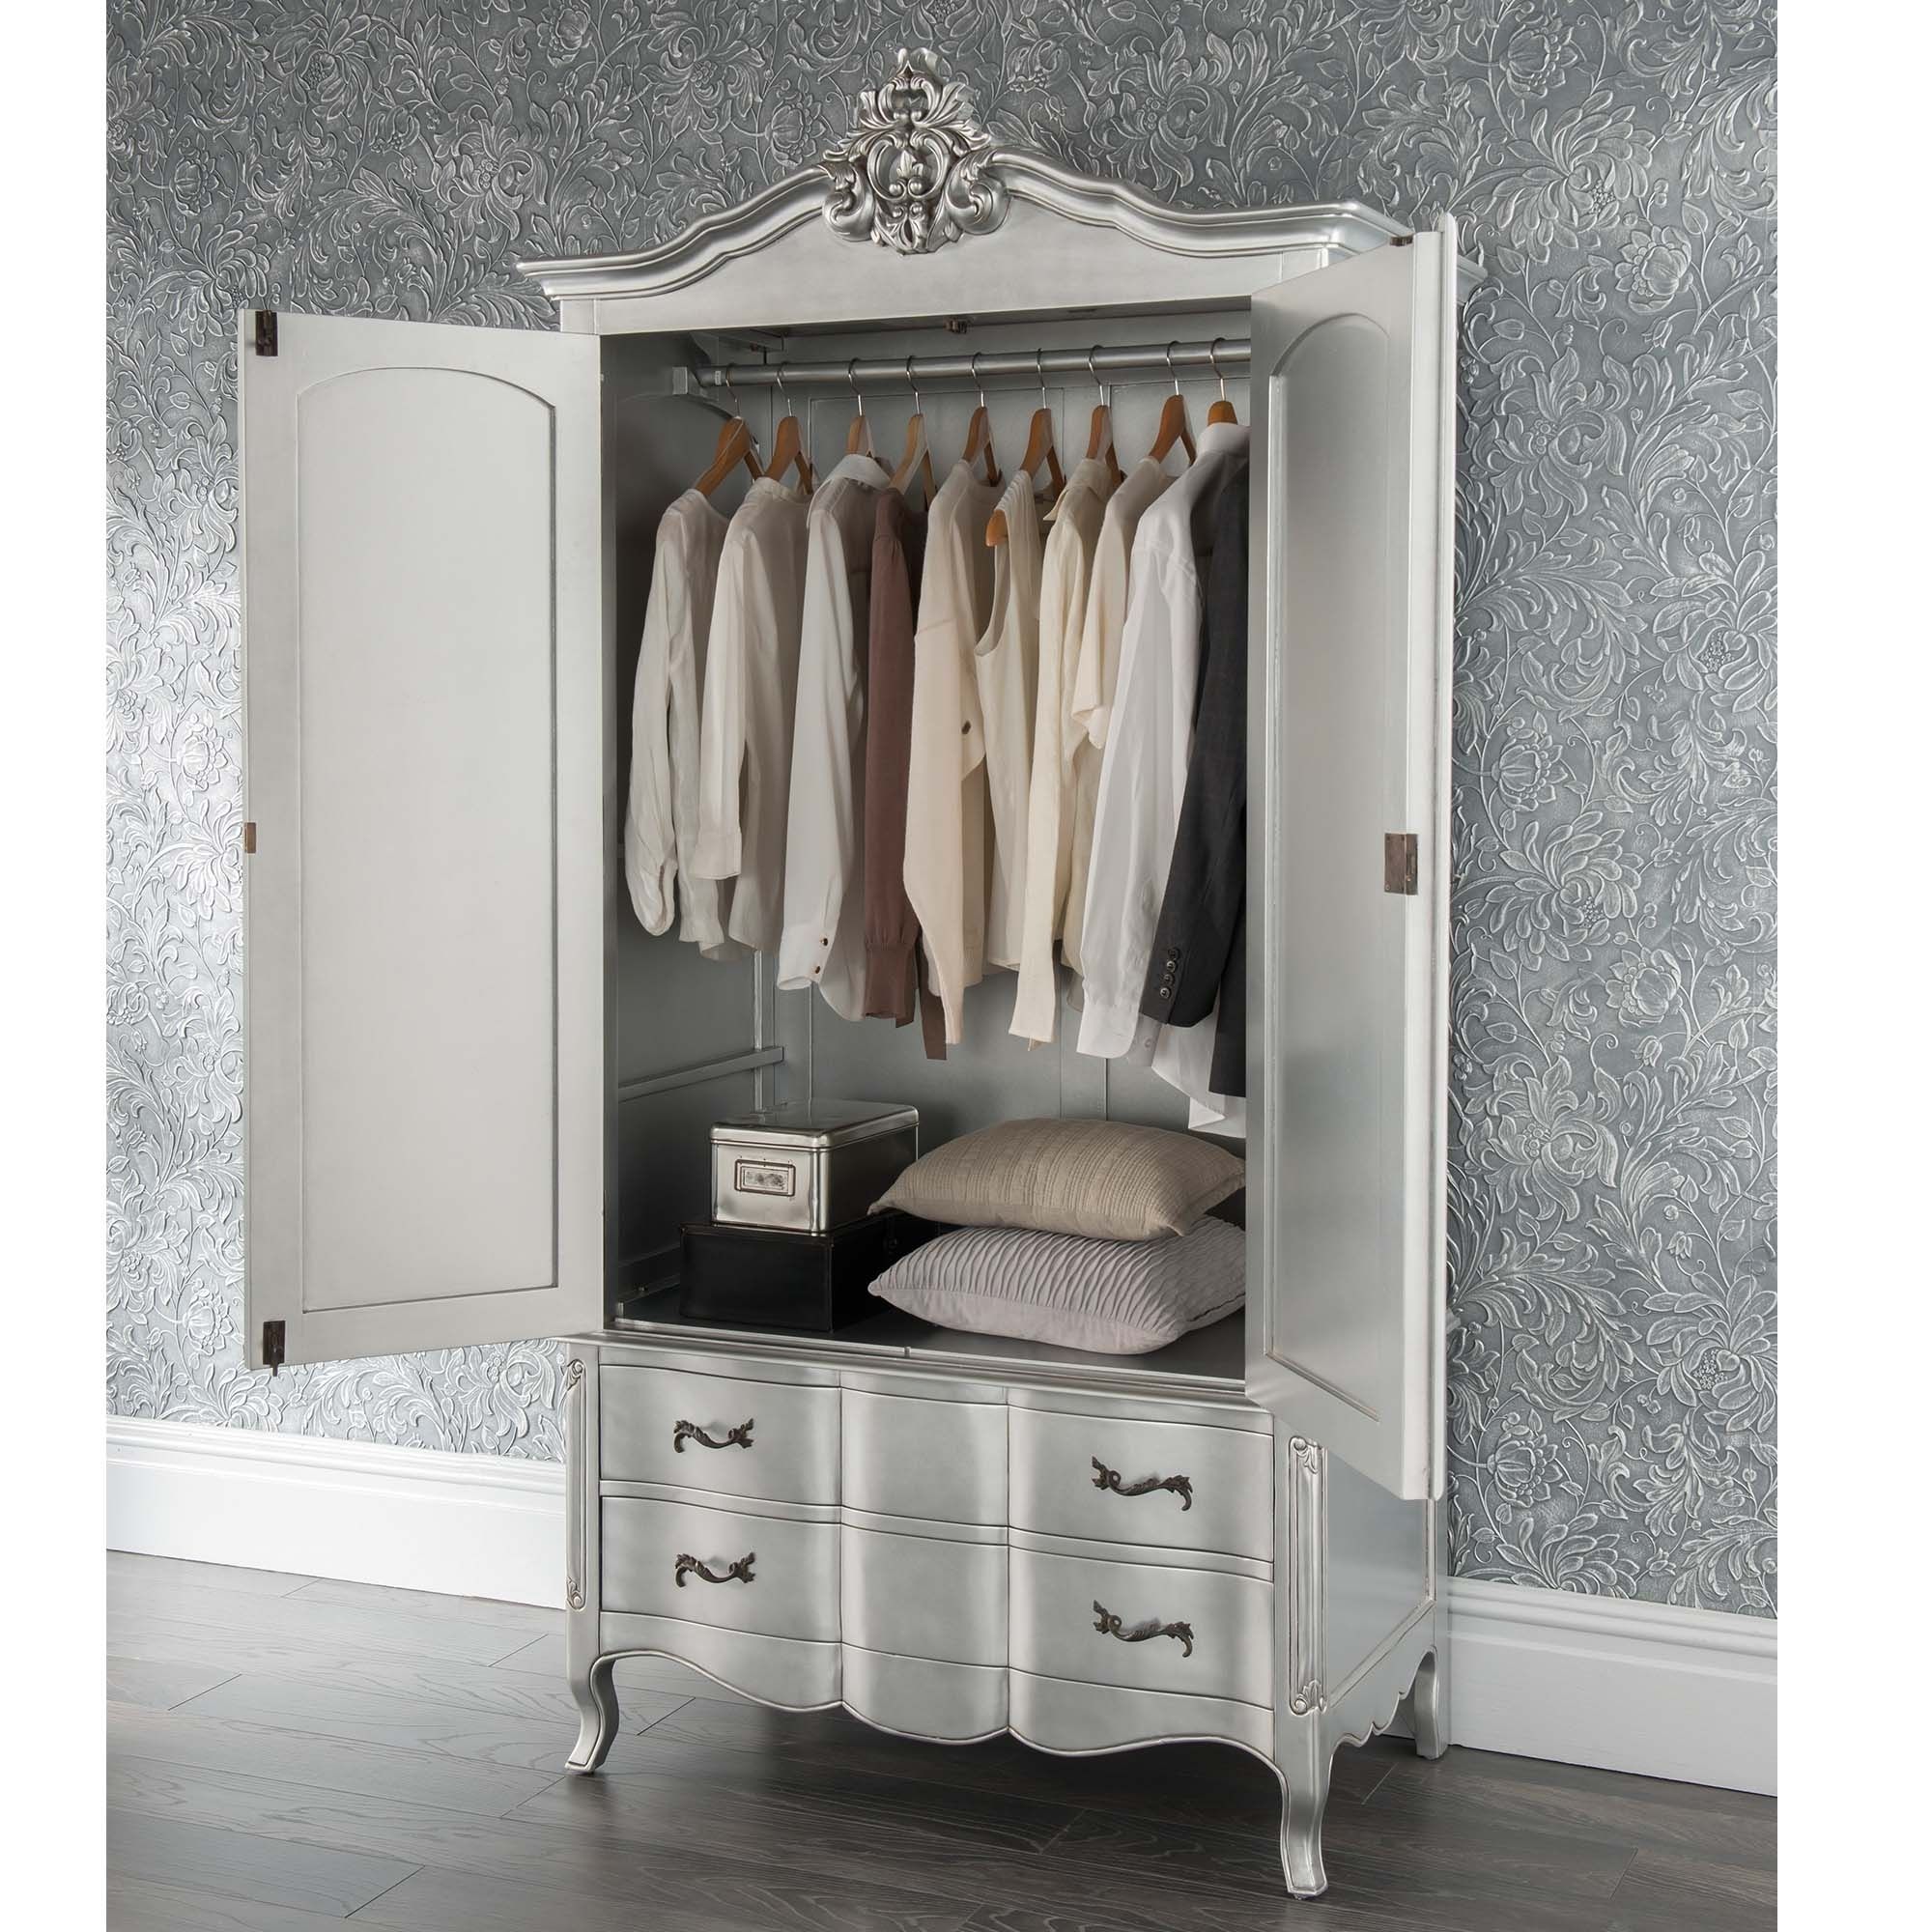 Estelle Antique French Style Wardrobe | French Style Furniture Within Silver Wardrobes (View 7 of 15)